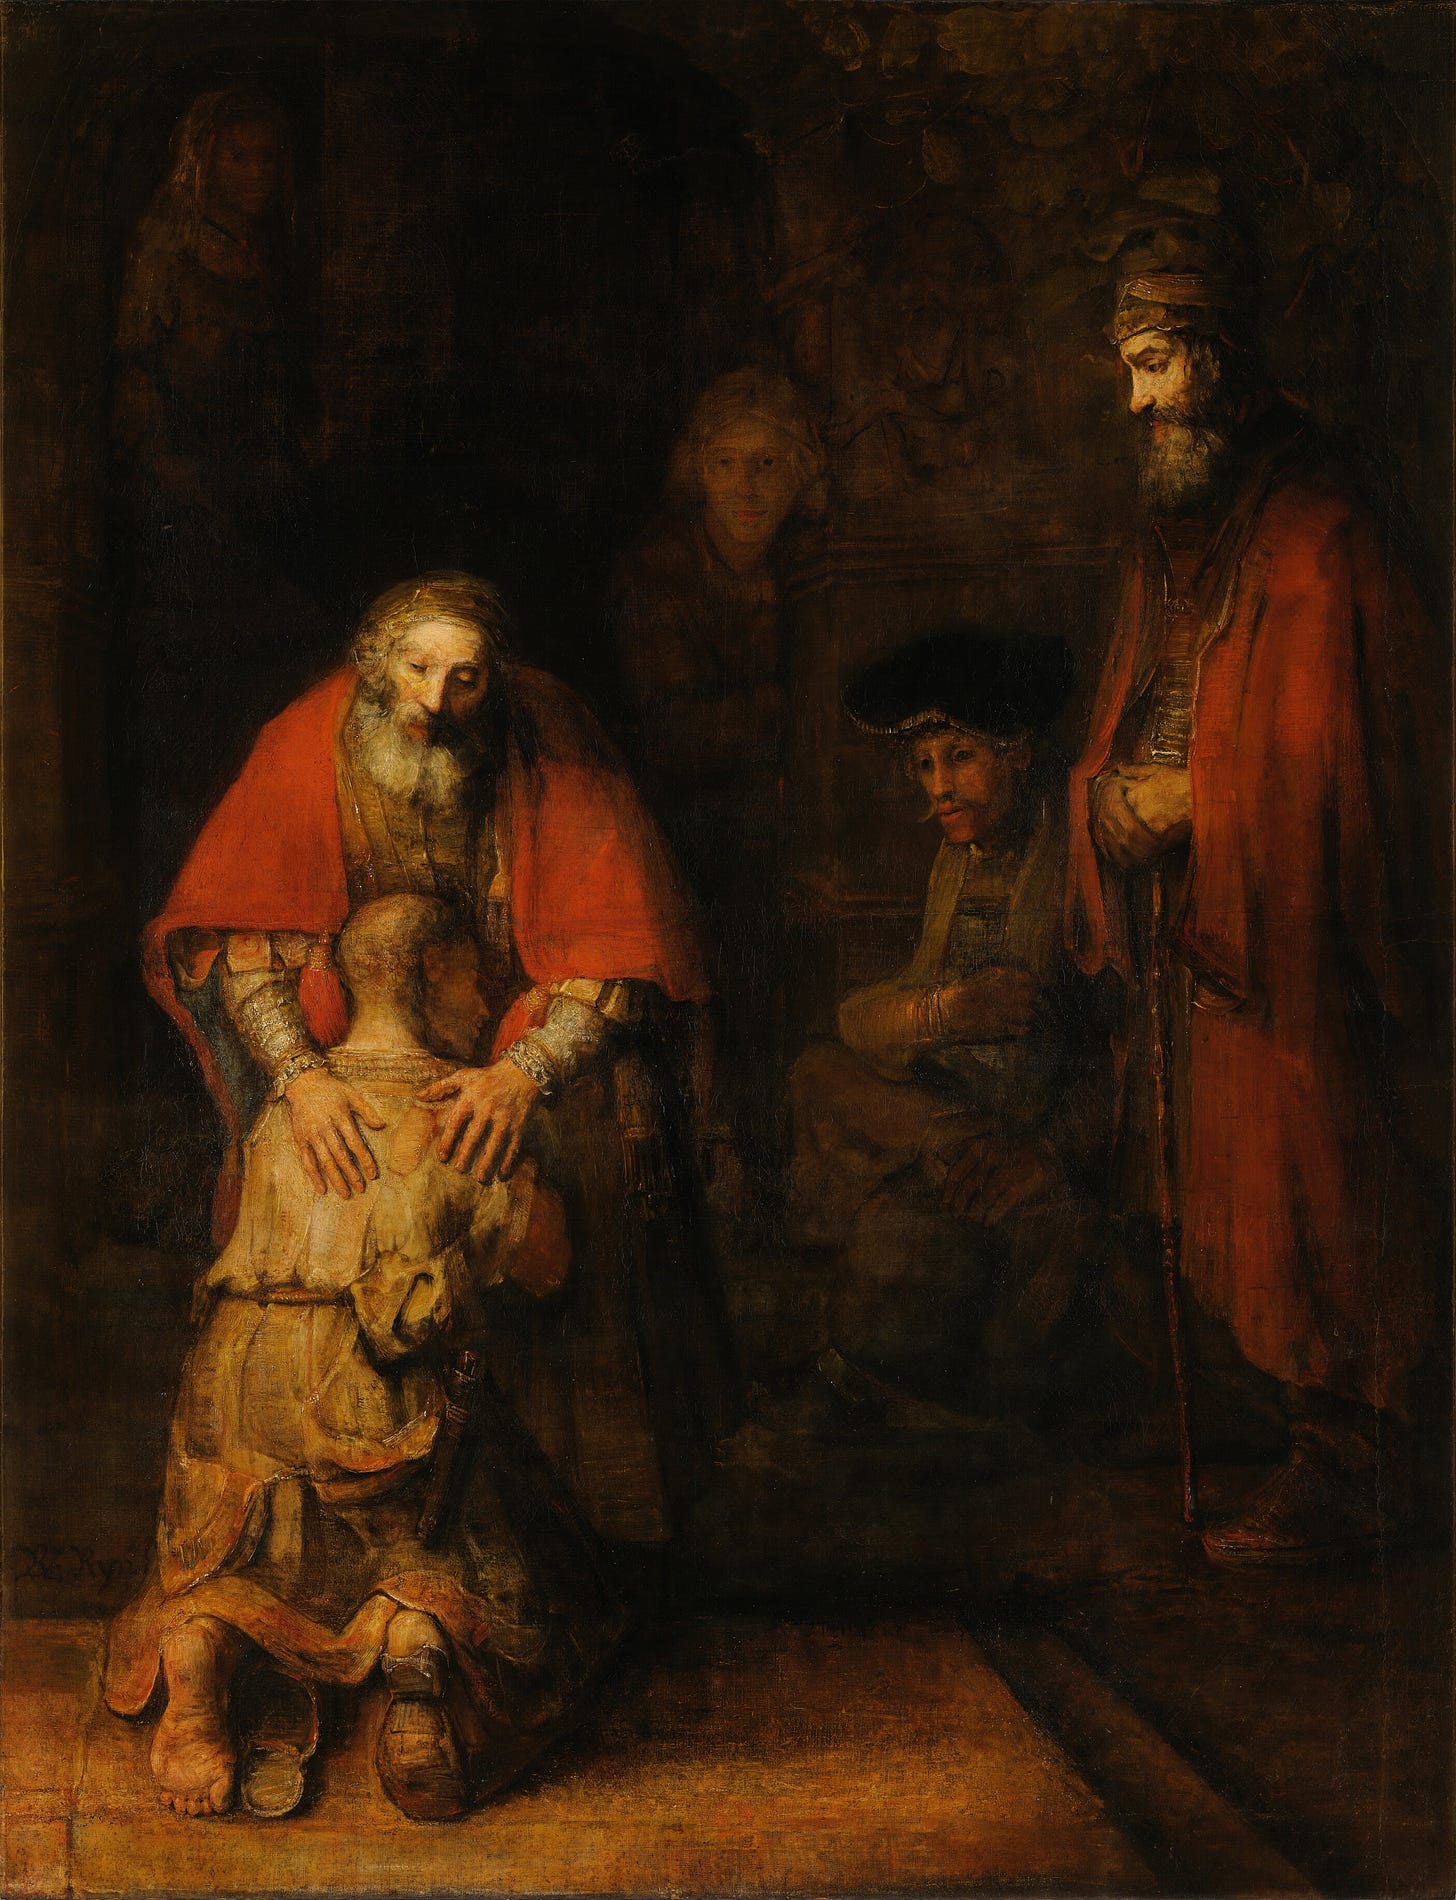 Return of the Prodigal Son (1668) by Rembrandt van Rijn